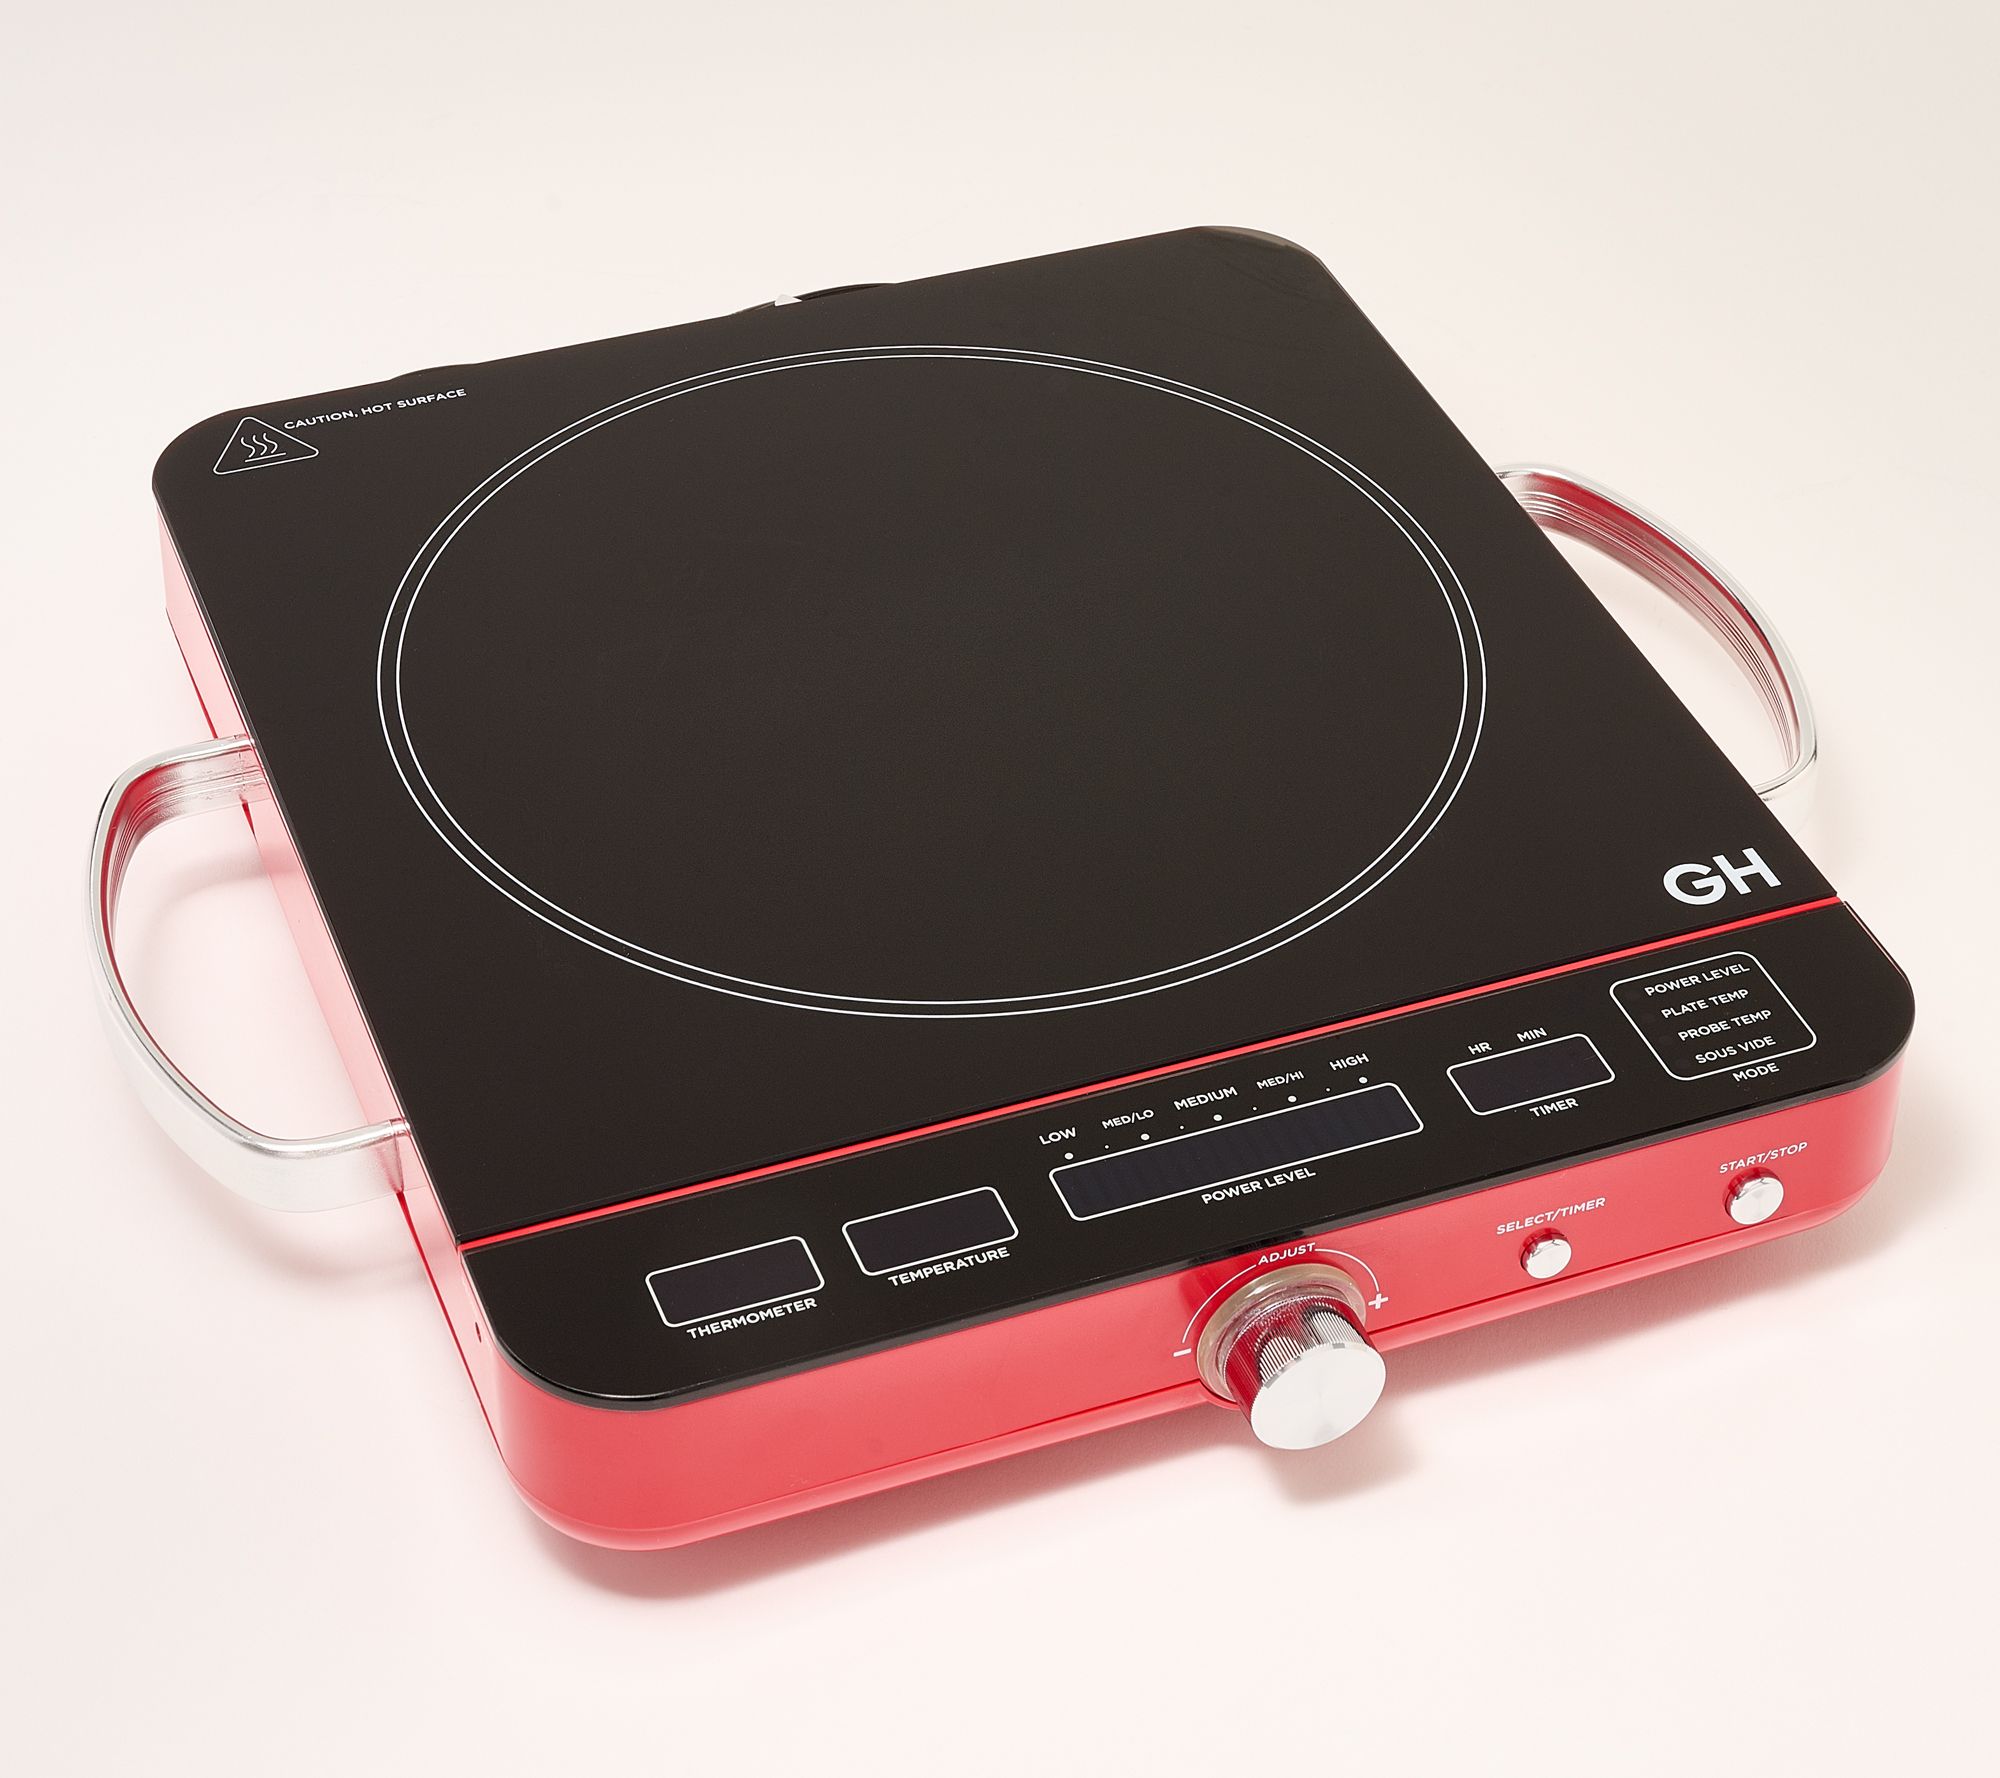 Good Housekeeping Smart Induction Cooktop with Probe & 10 Pan